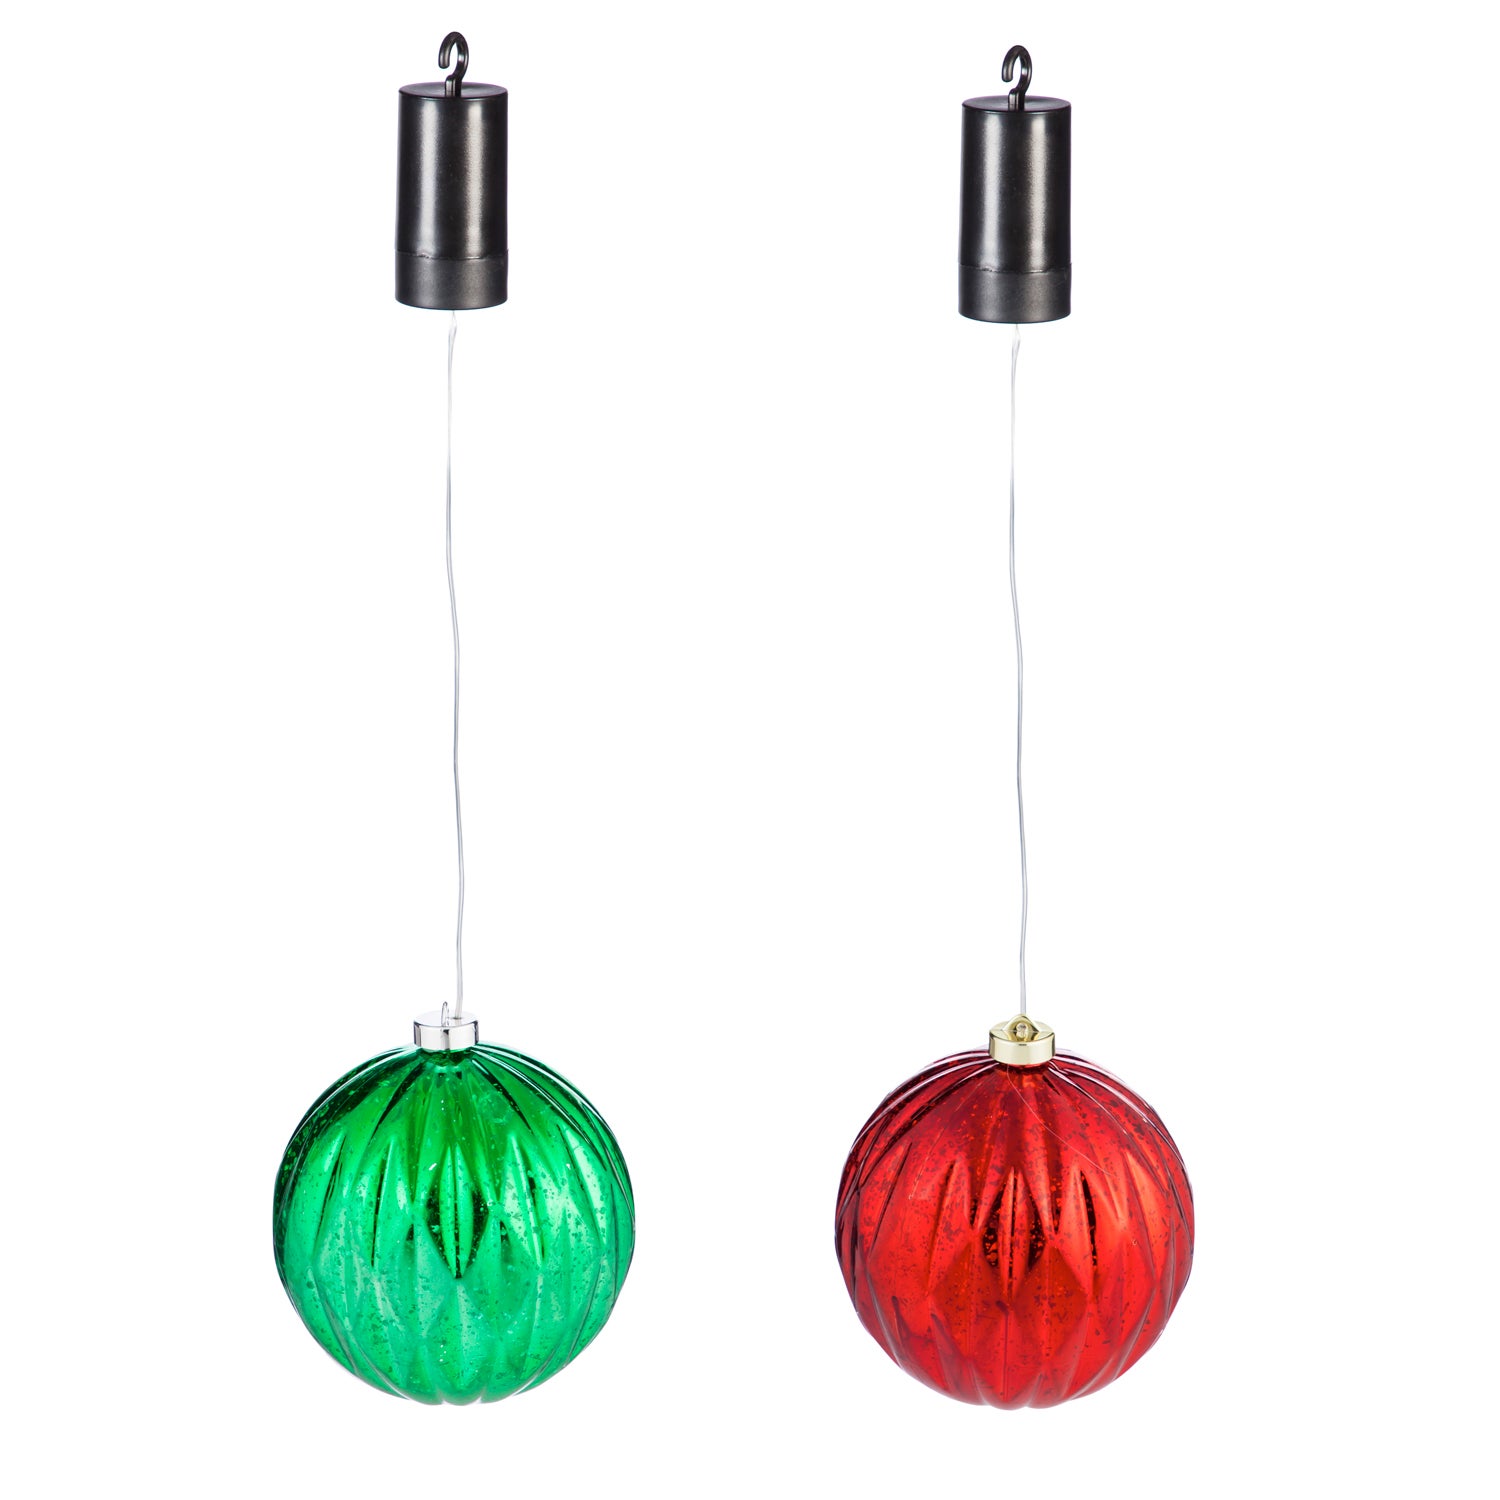 Green and Red 6" Shatterproof Outdoor-Safe Battery Operated LED Acrylic Ornaments, Set of 2